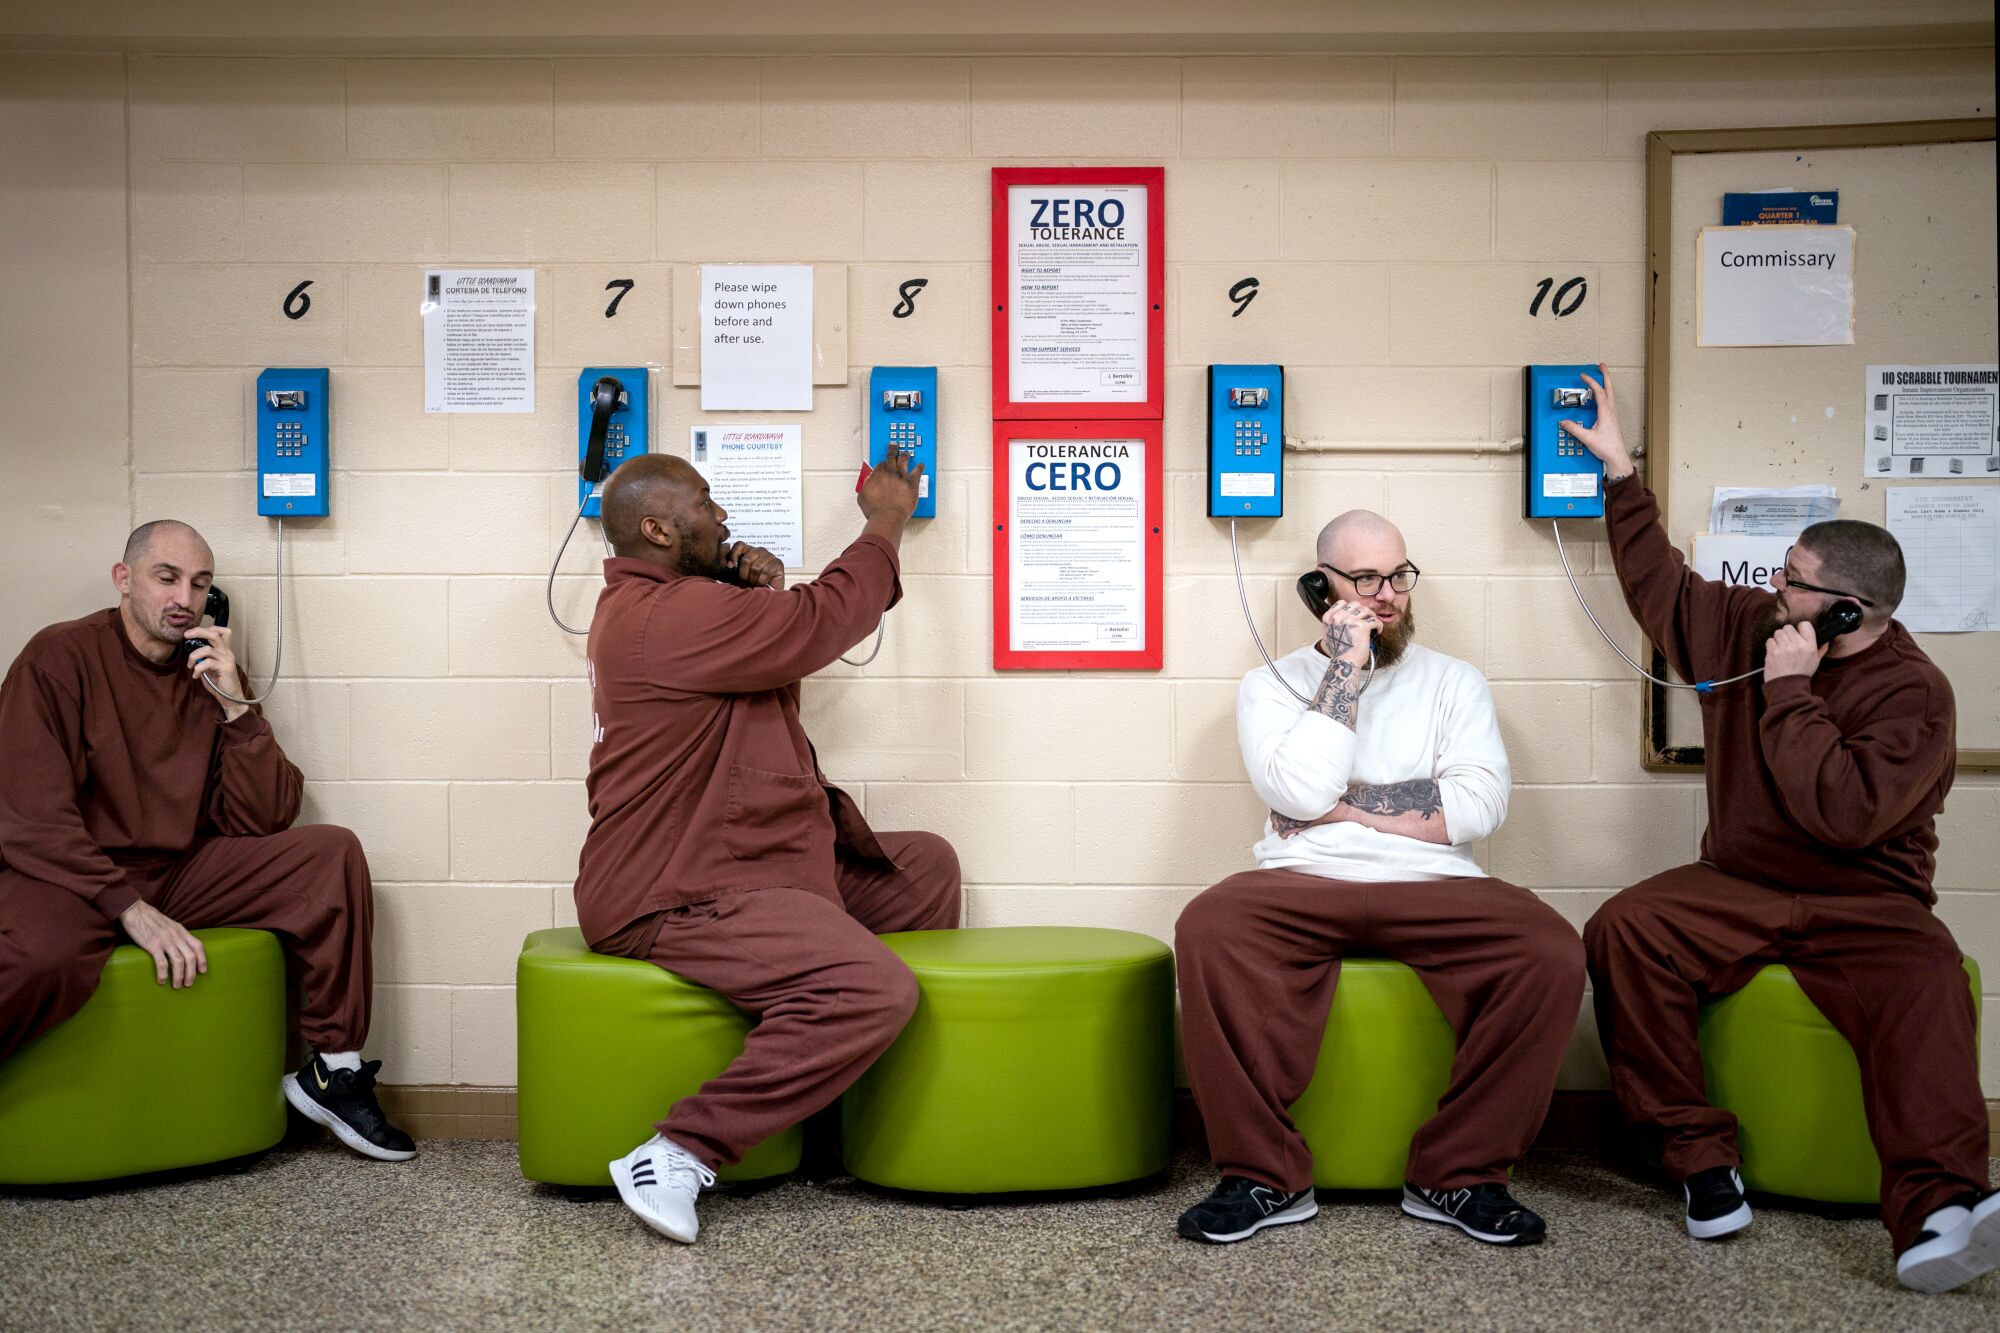 Four inmates in brown uniforms sit on bolsters and talk to a phone mounted on the wall behind them.